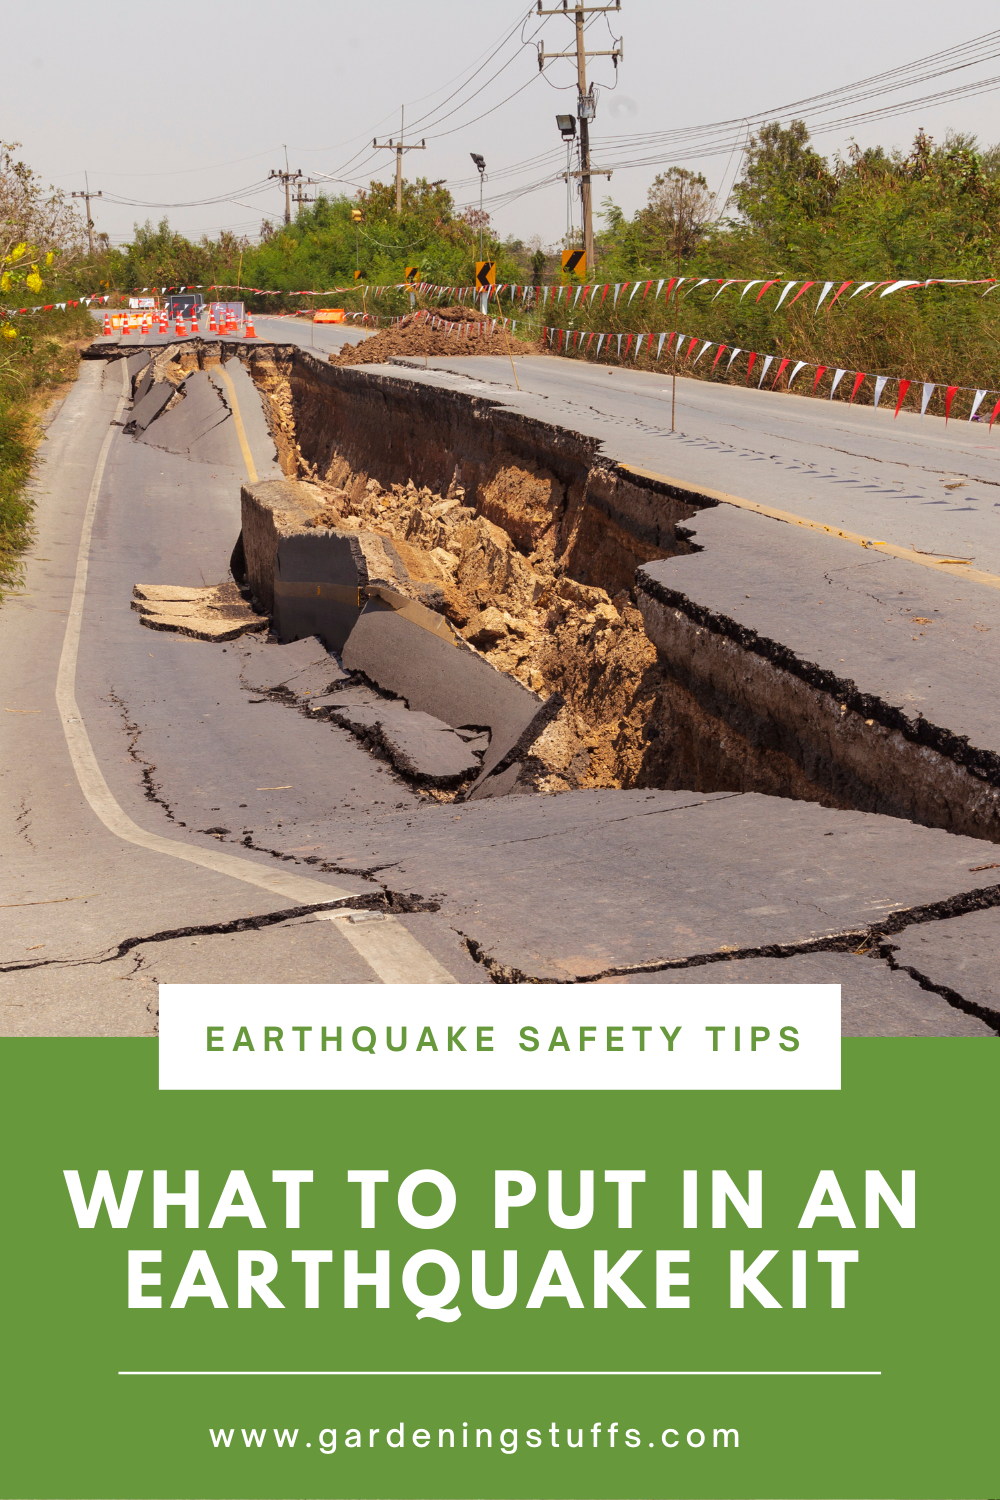 Earthquake kits should be prepped ahead of time, especially if you live within a high-risk zone. Check out our article on how to prepare your home for an earthquake and an emergency preparedness kit to protect yourself and your family from potential hazards and injuries.